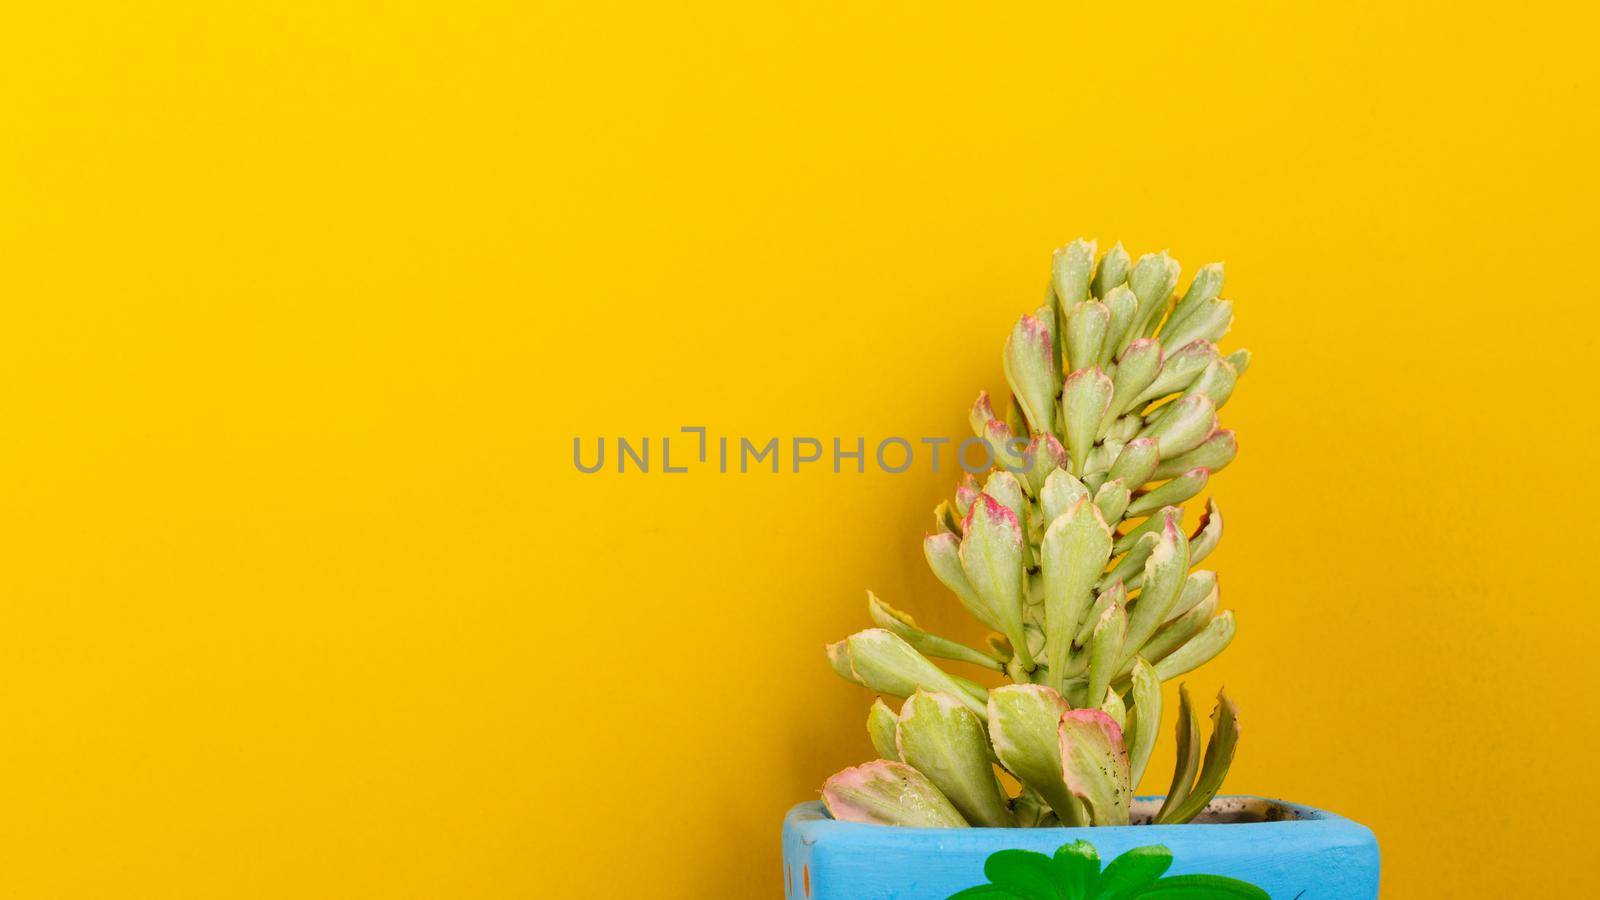 Green plant on yellow background. by Wasant